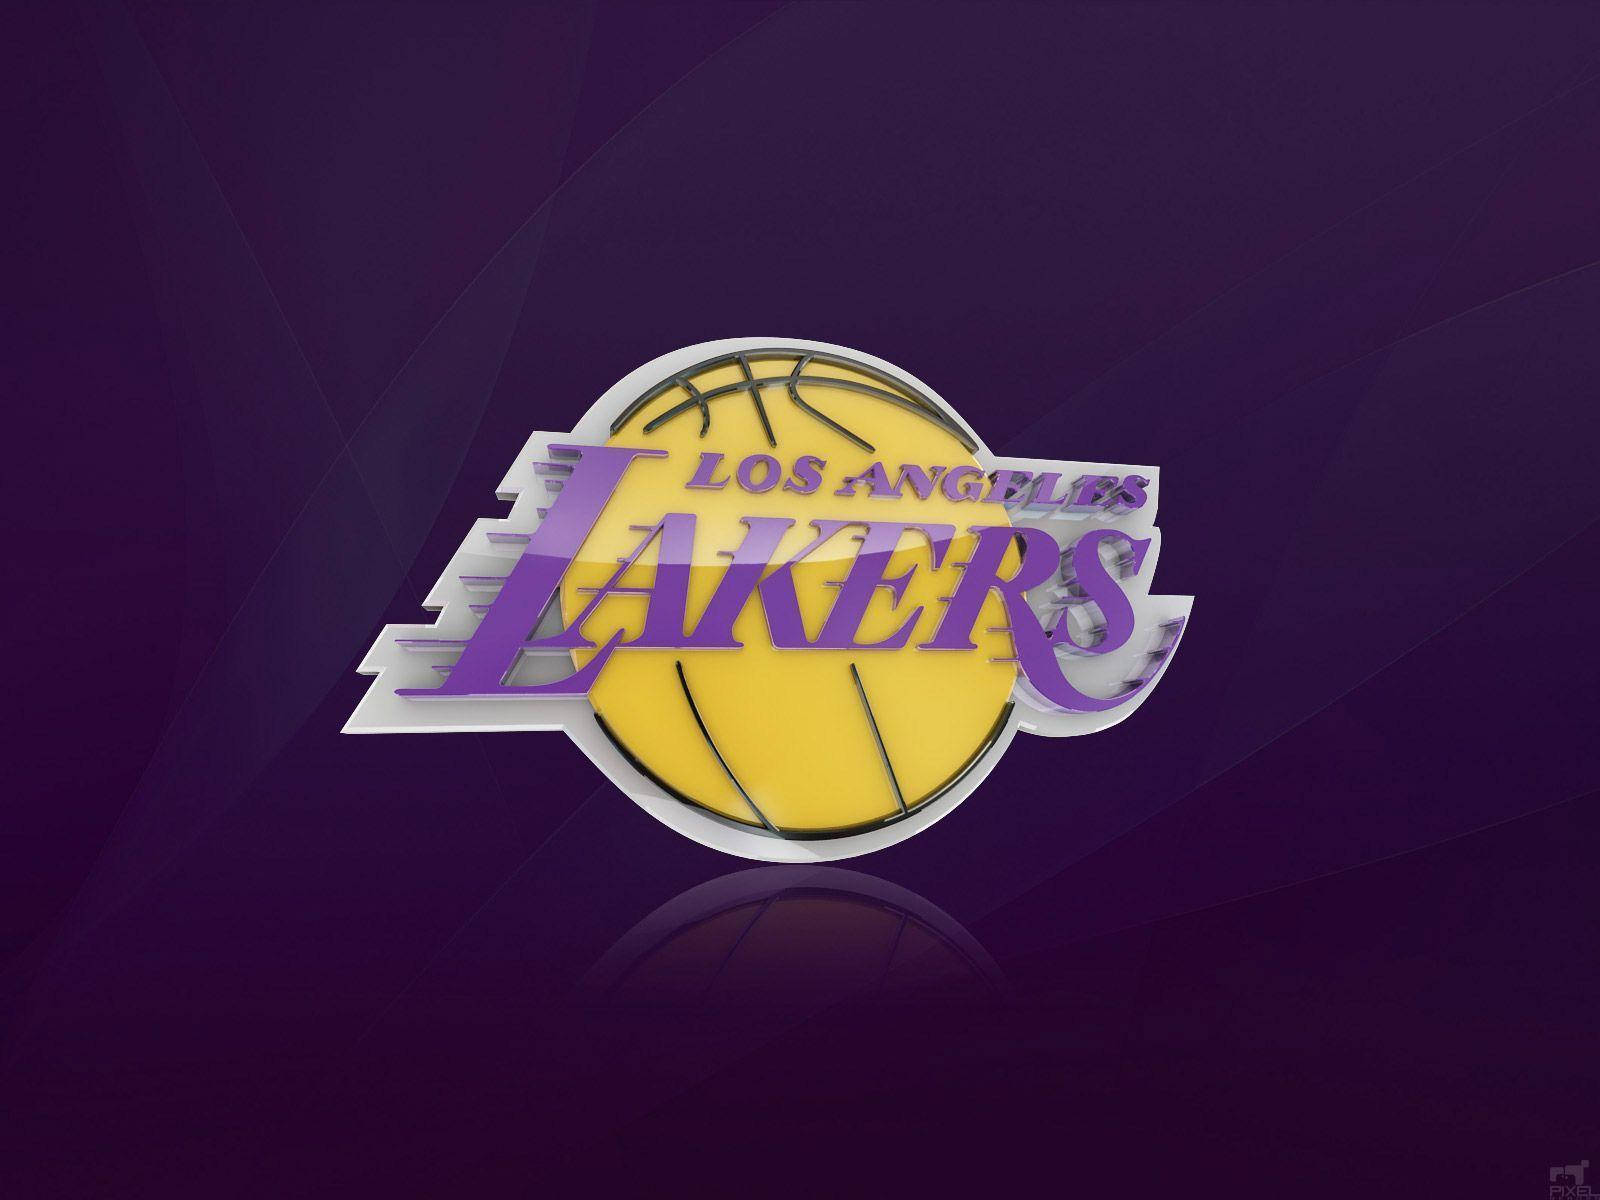 Experience the exciting world of Lakers basketball! Wallpaper